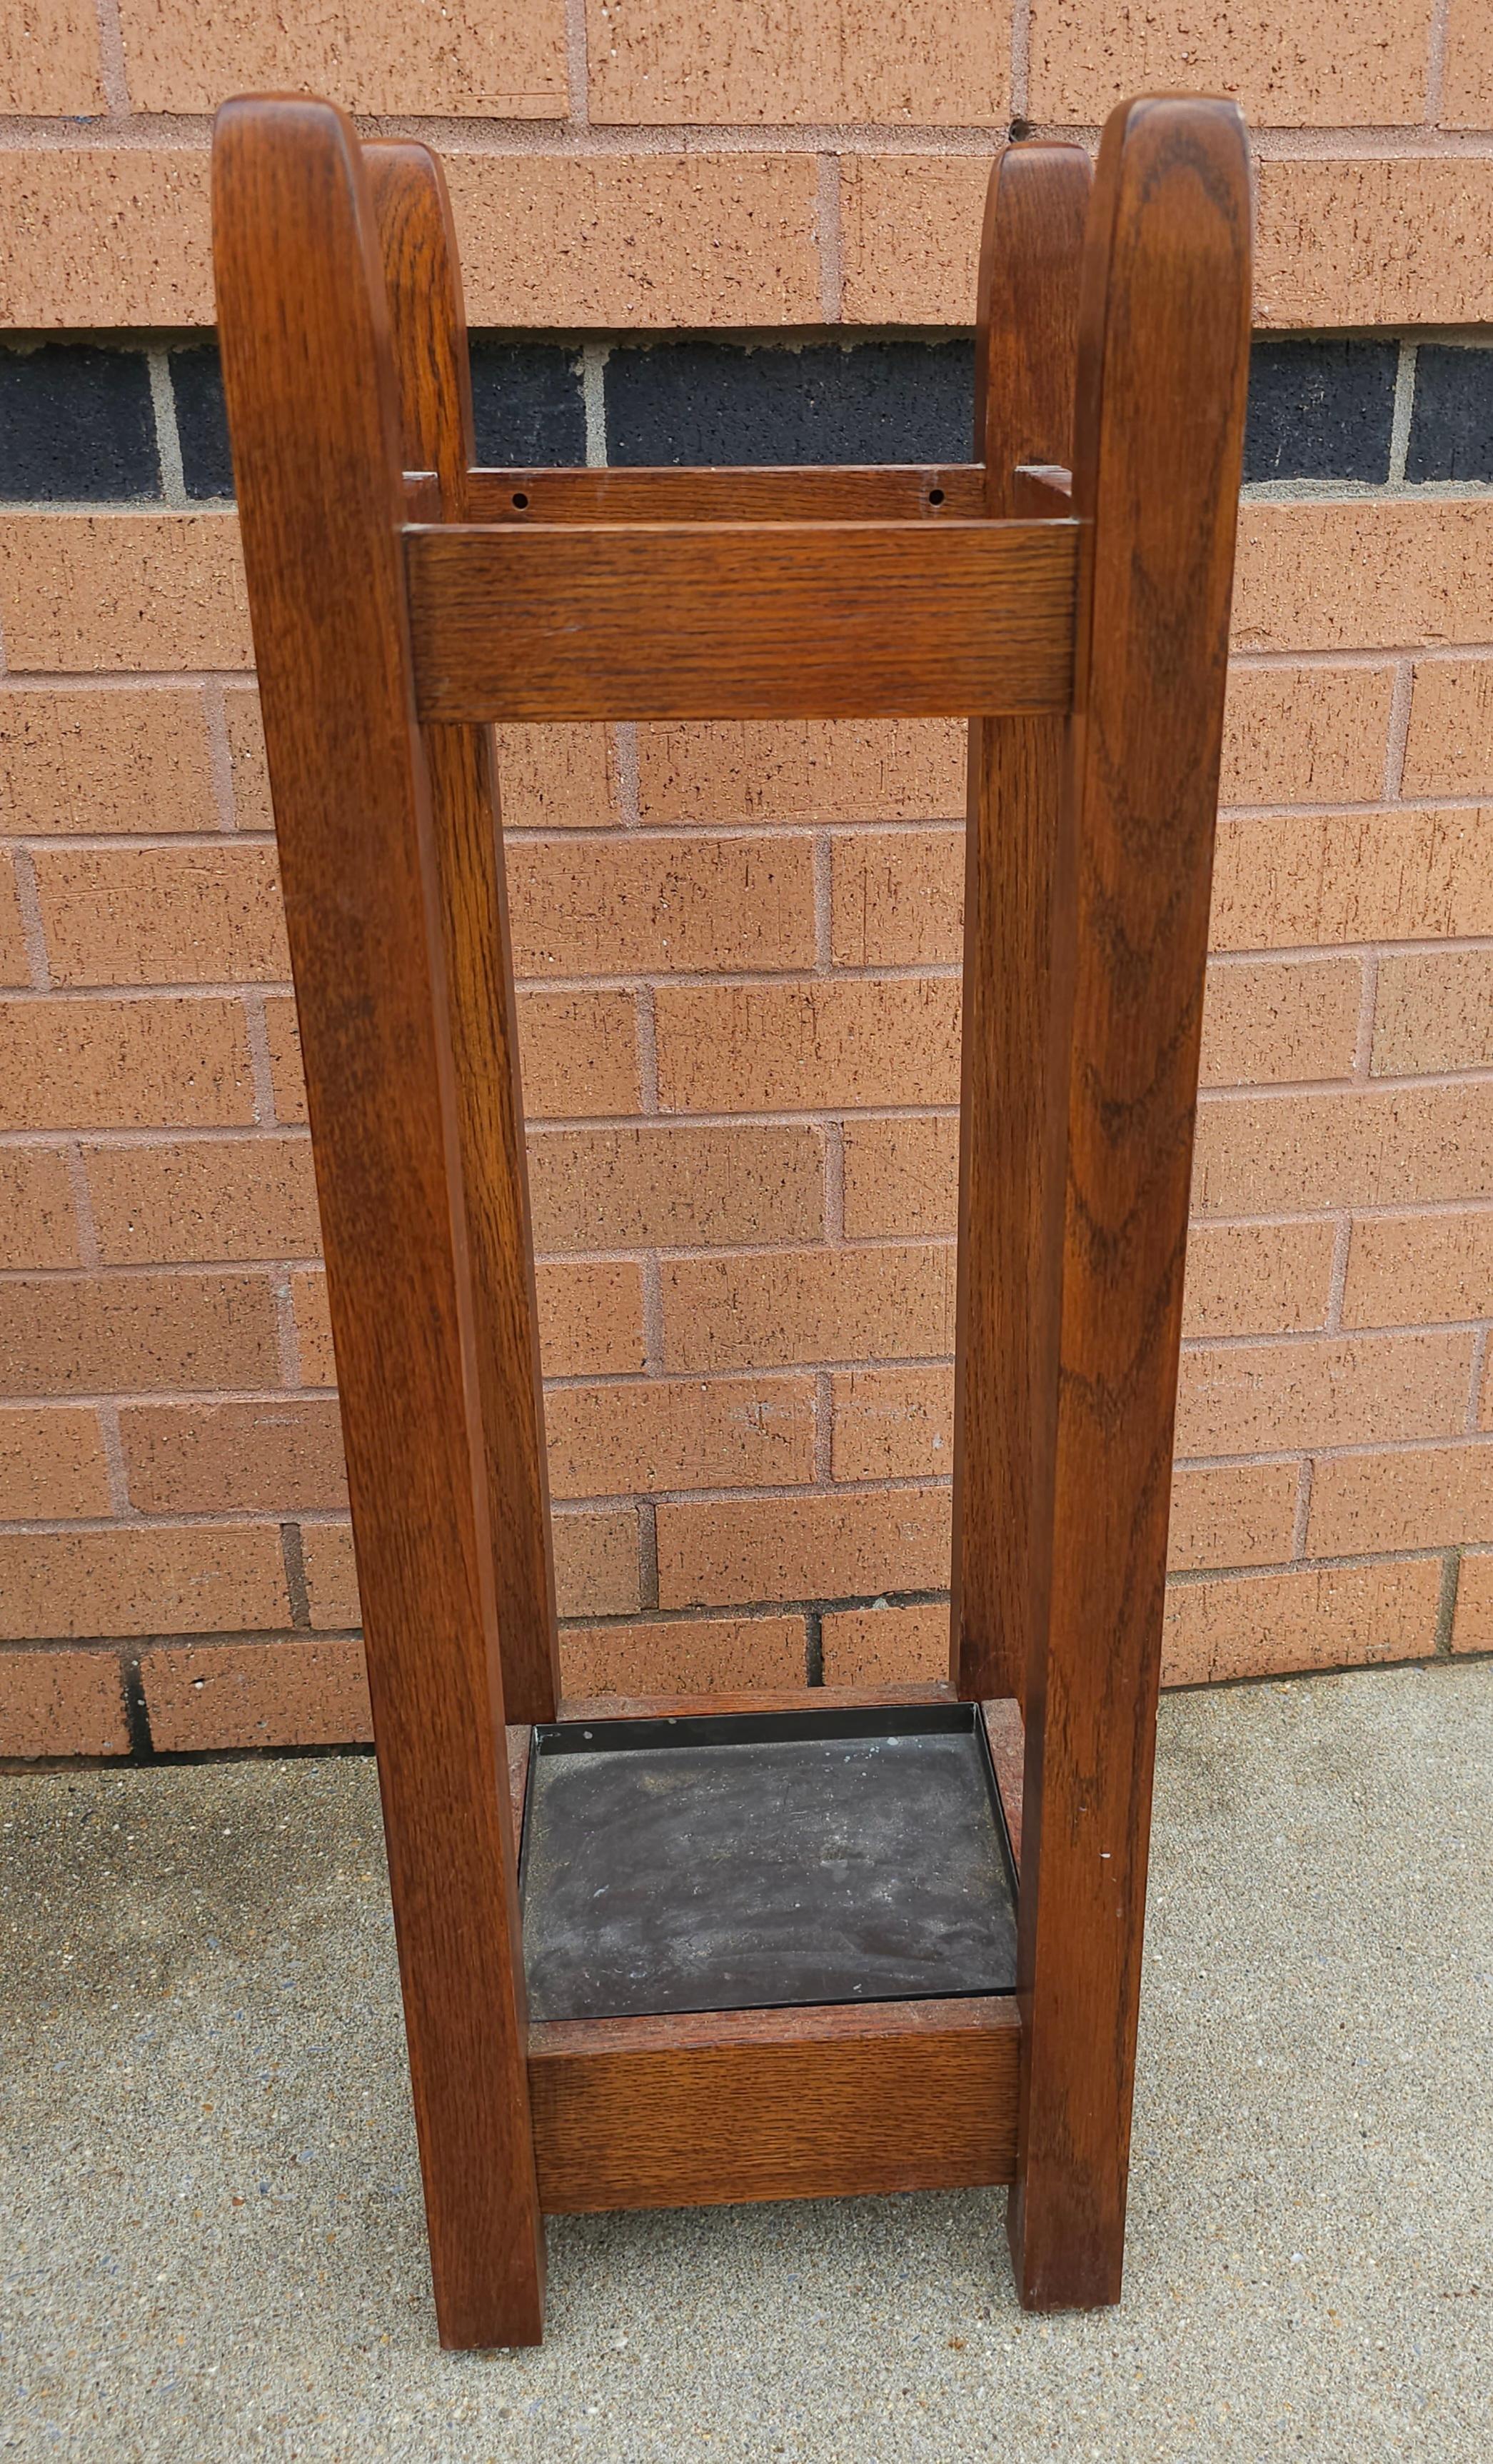 Stickley Furniture Oak Umbrella Stand In Excellent Condition For Sale In Germantown, MD